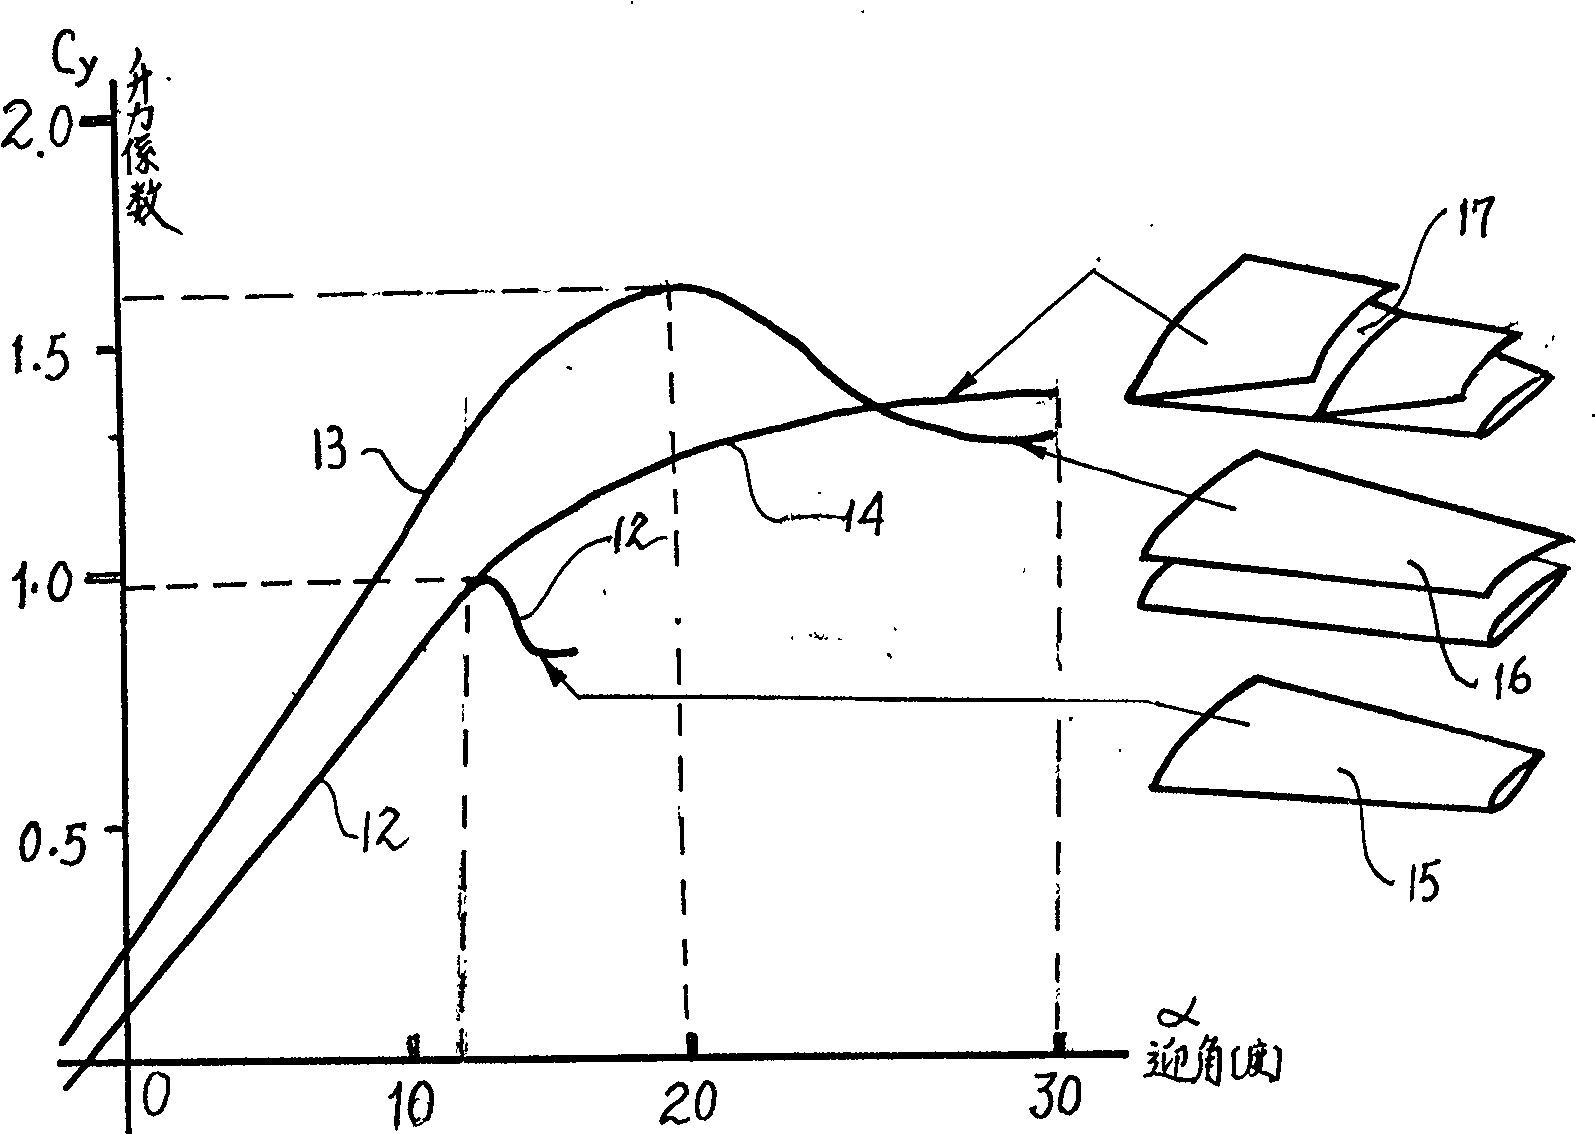 Sail wing for increasing lift force and stalling attack angle